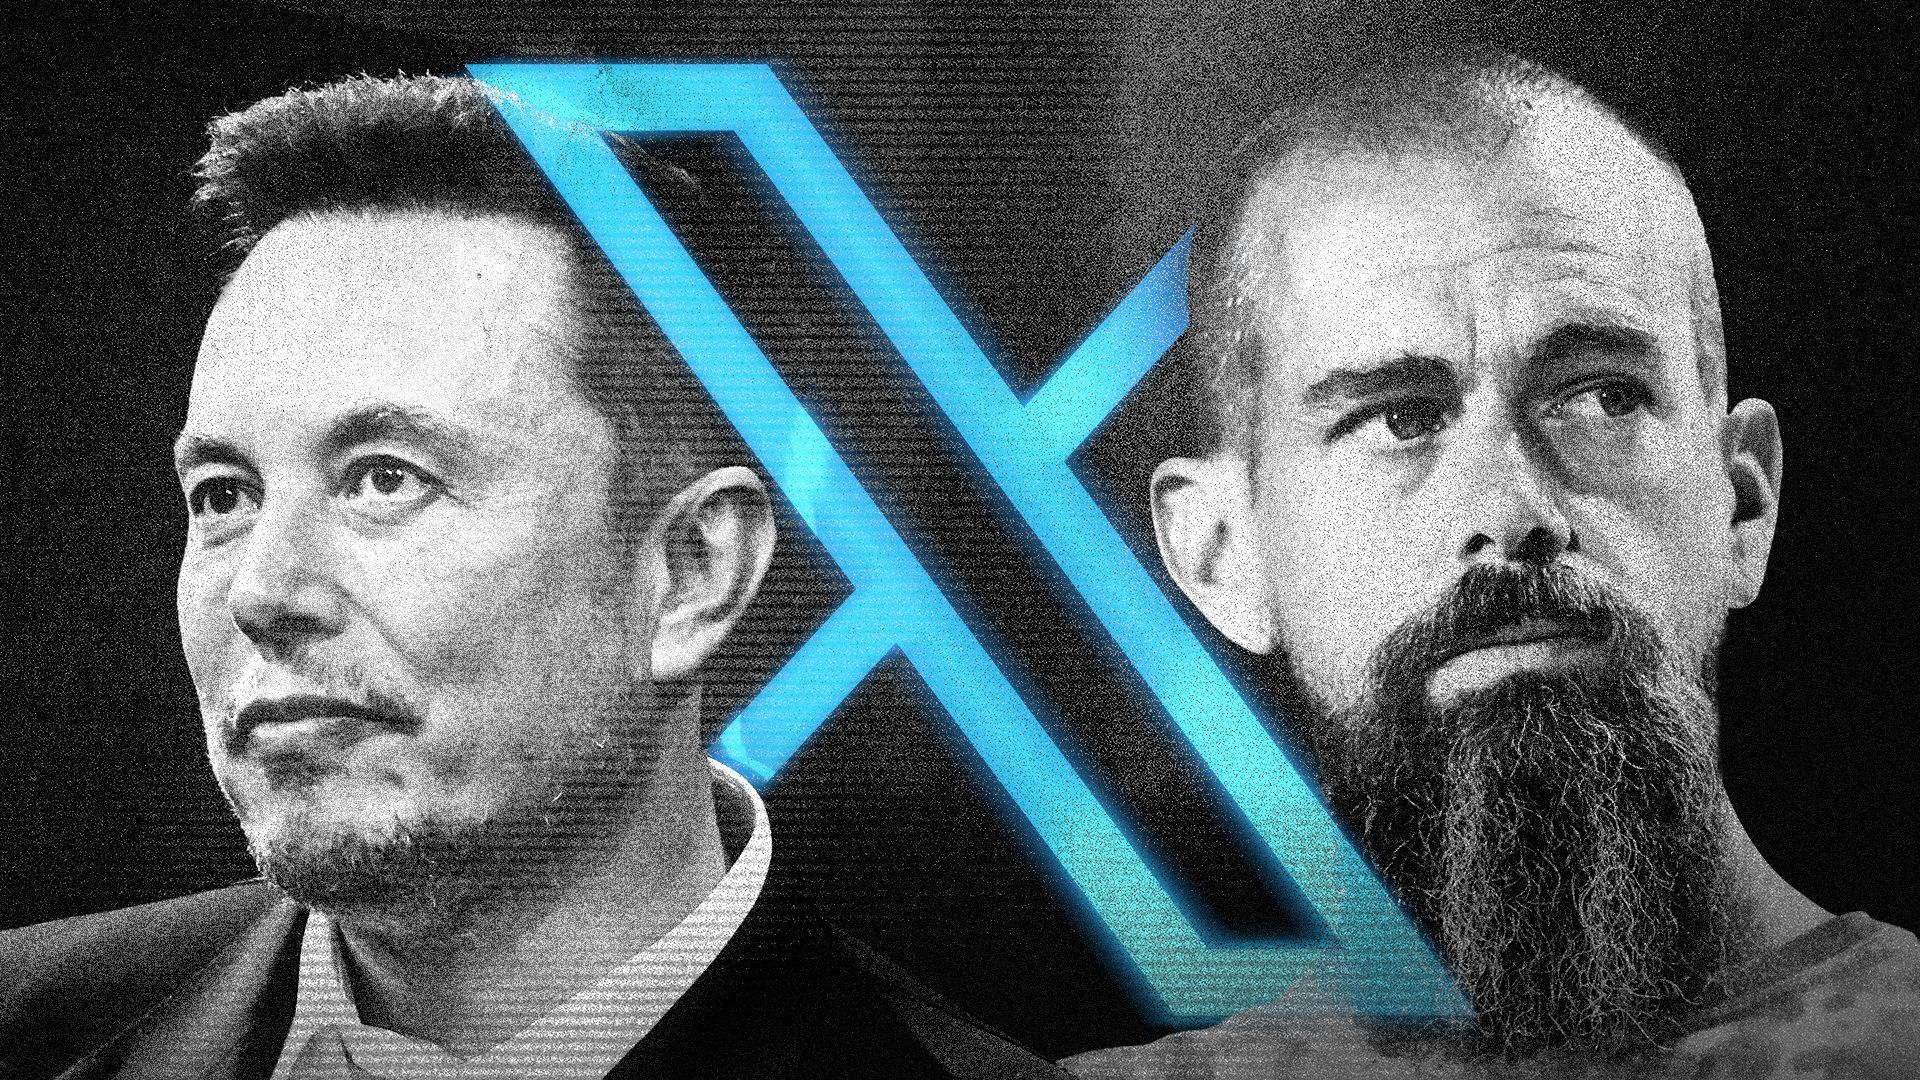 Photo Illustration of Elon Musk and Jack Dorsey with the X logo between them